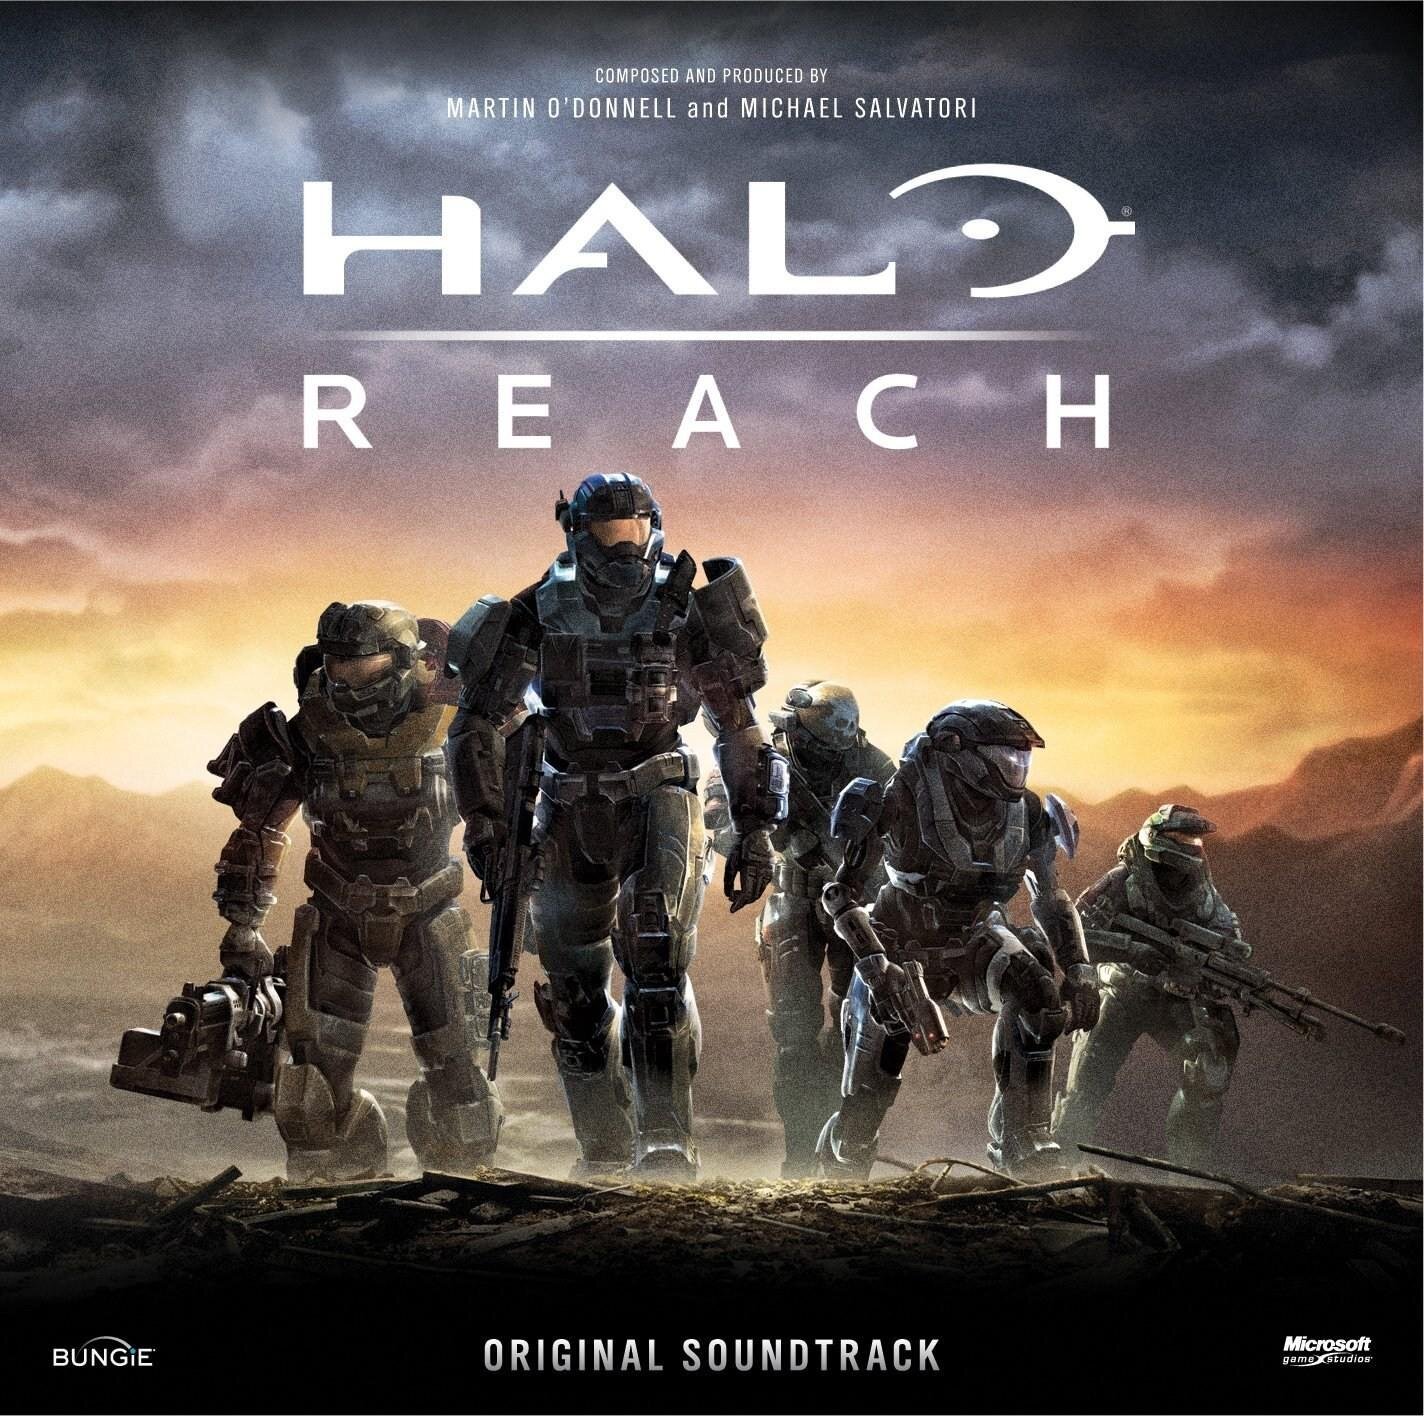 'Halo: Reach' comes to PC and Xbox One on Dec. 3 as part of 'The Master ...